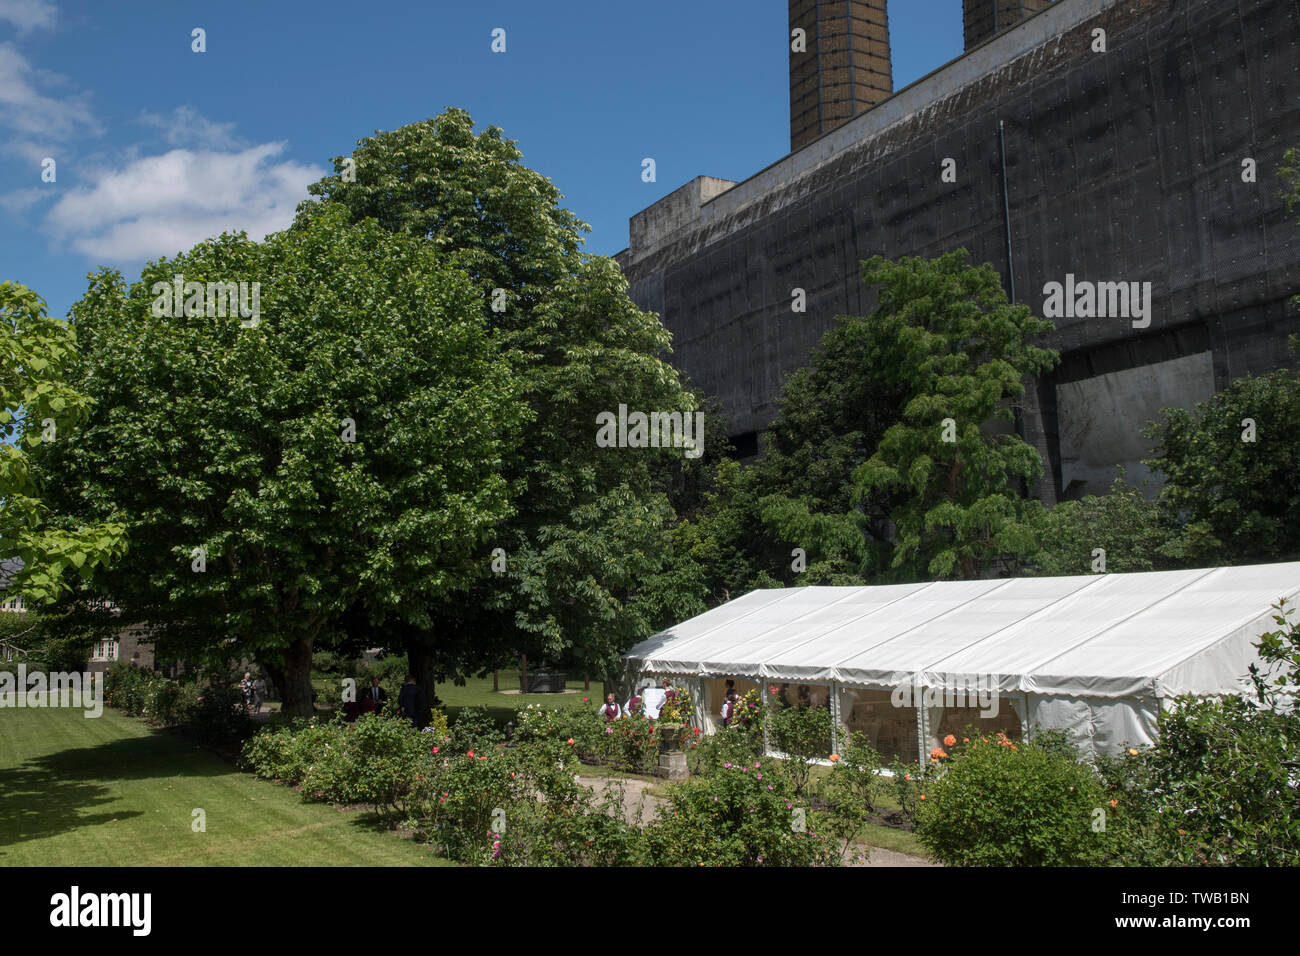 Trinity Hospital Almshouses, Greenwich south London UK The private gardens. HOMER SYKES Stock Photo